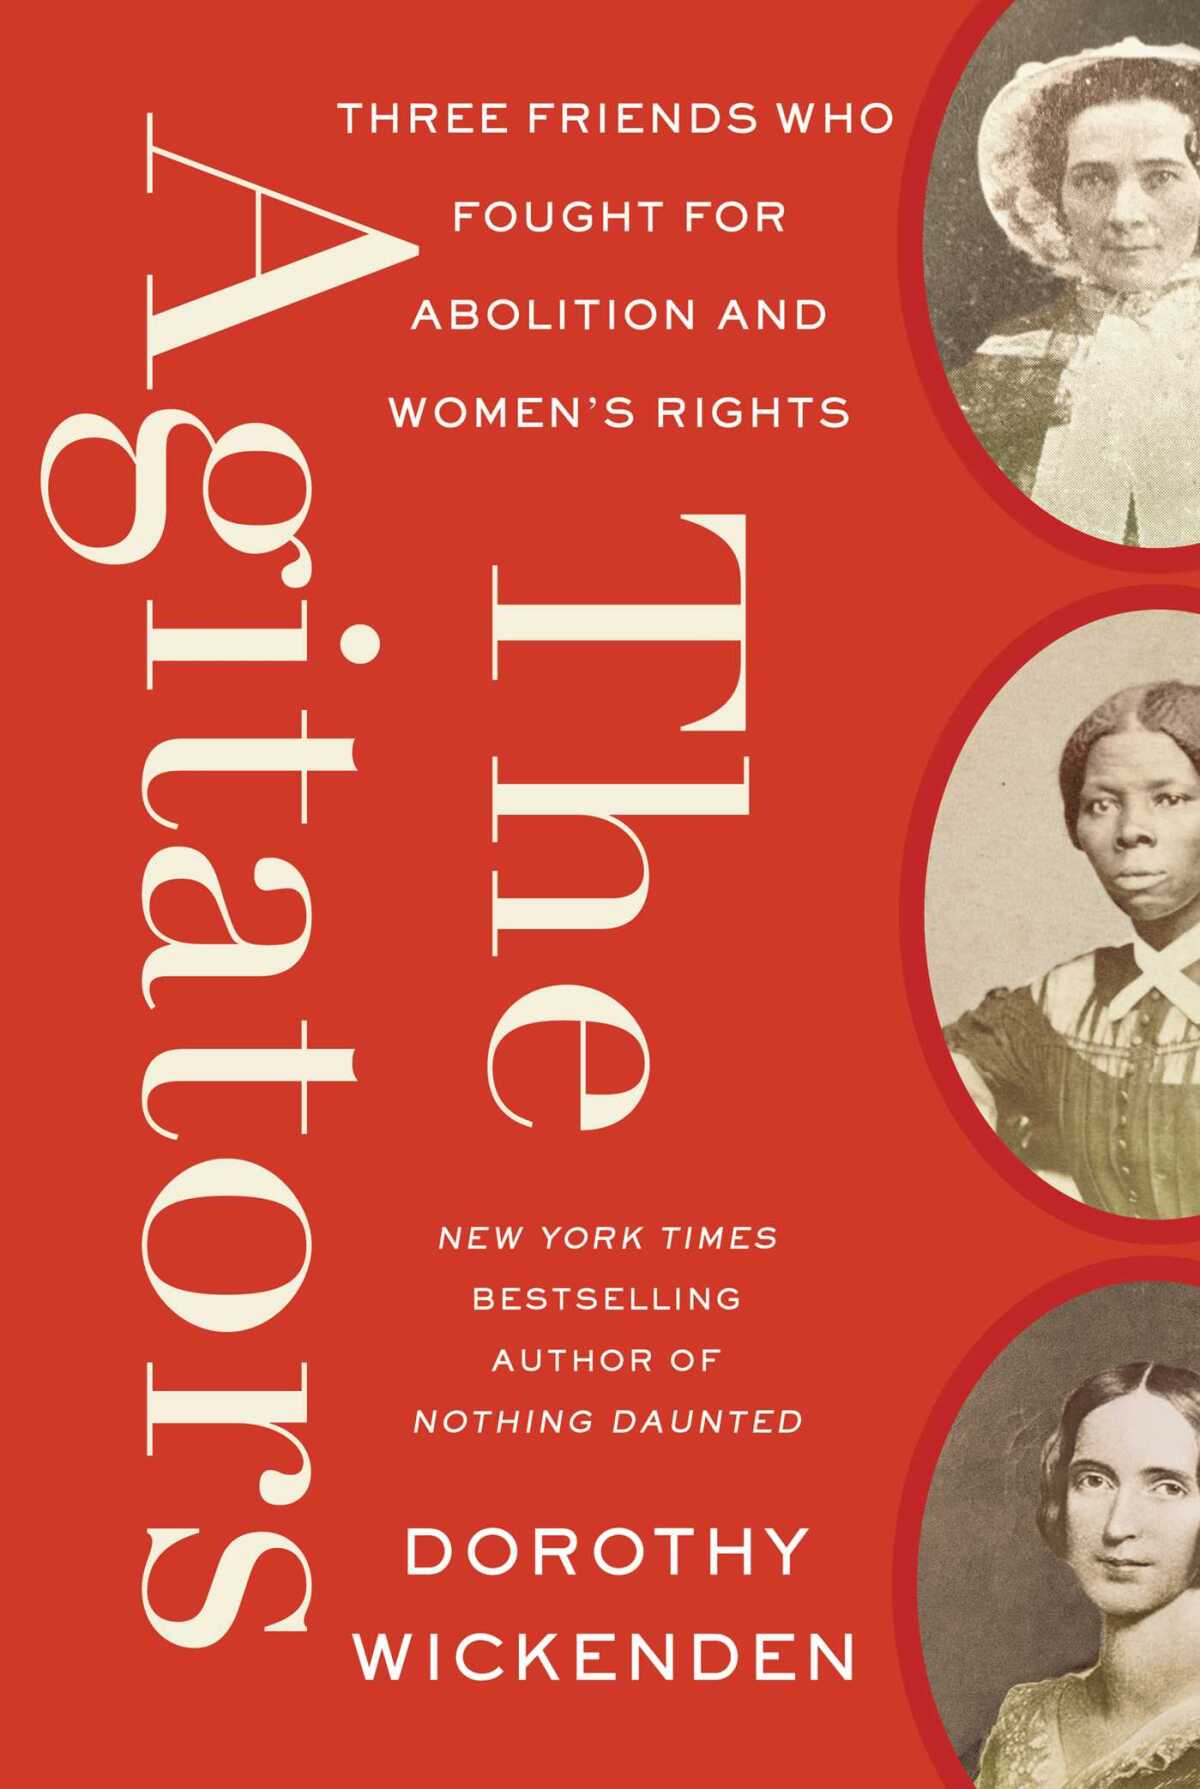 "The Agitators: Three Friends who Fought for Abolition and Women’s Rights," by Dorothy Wickenden